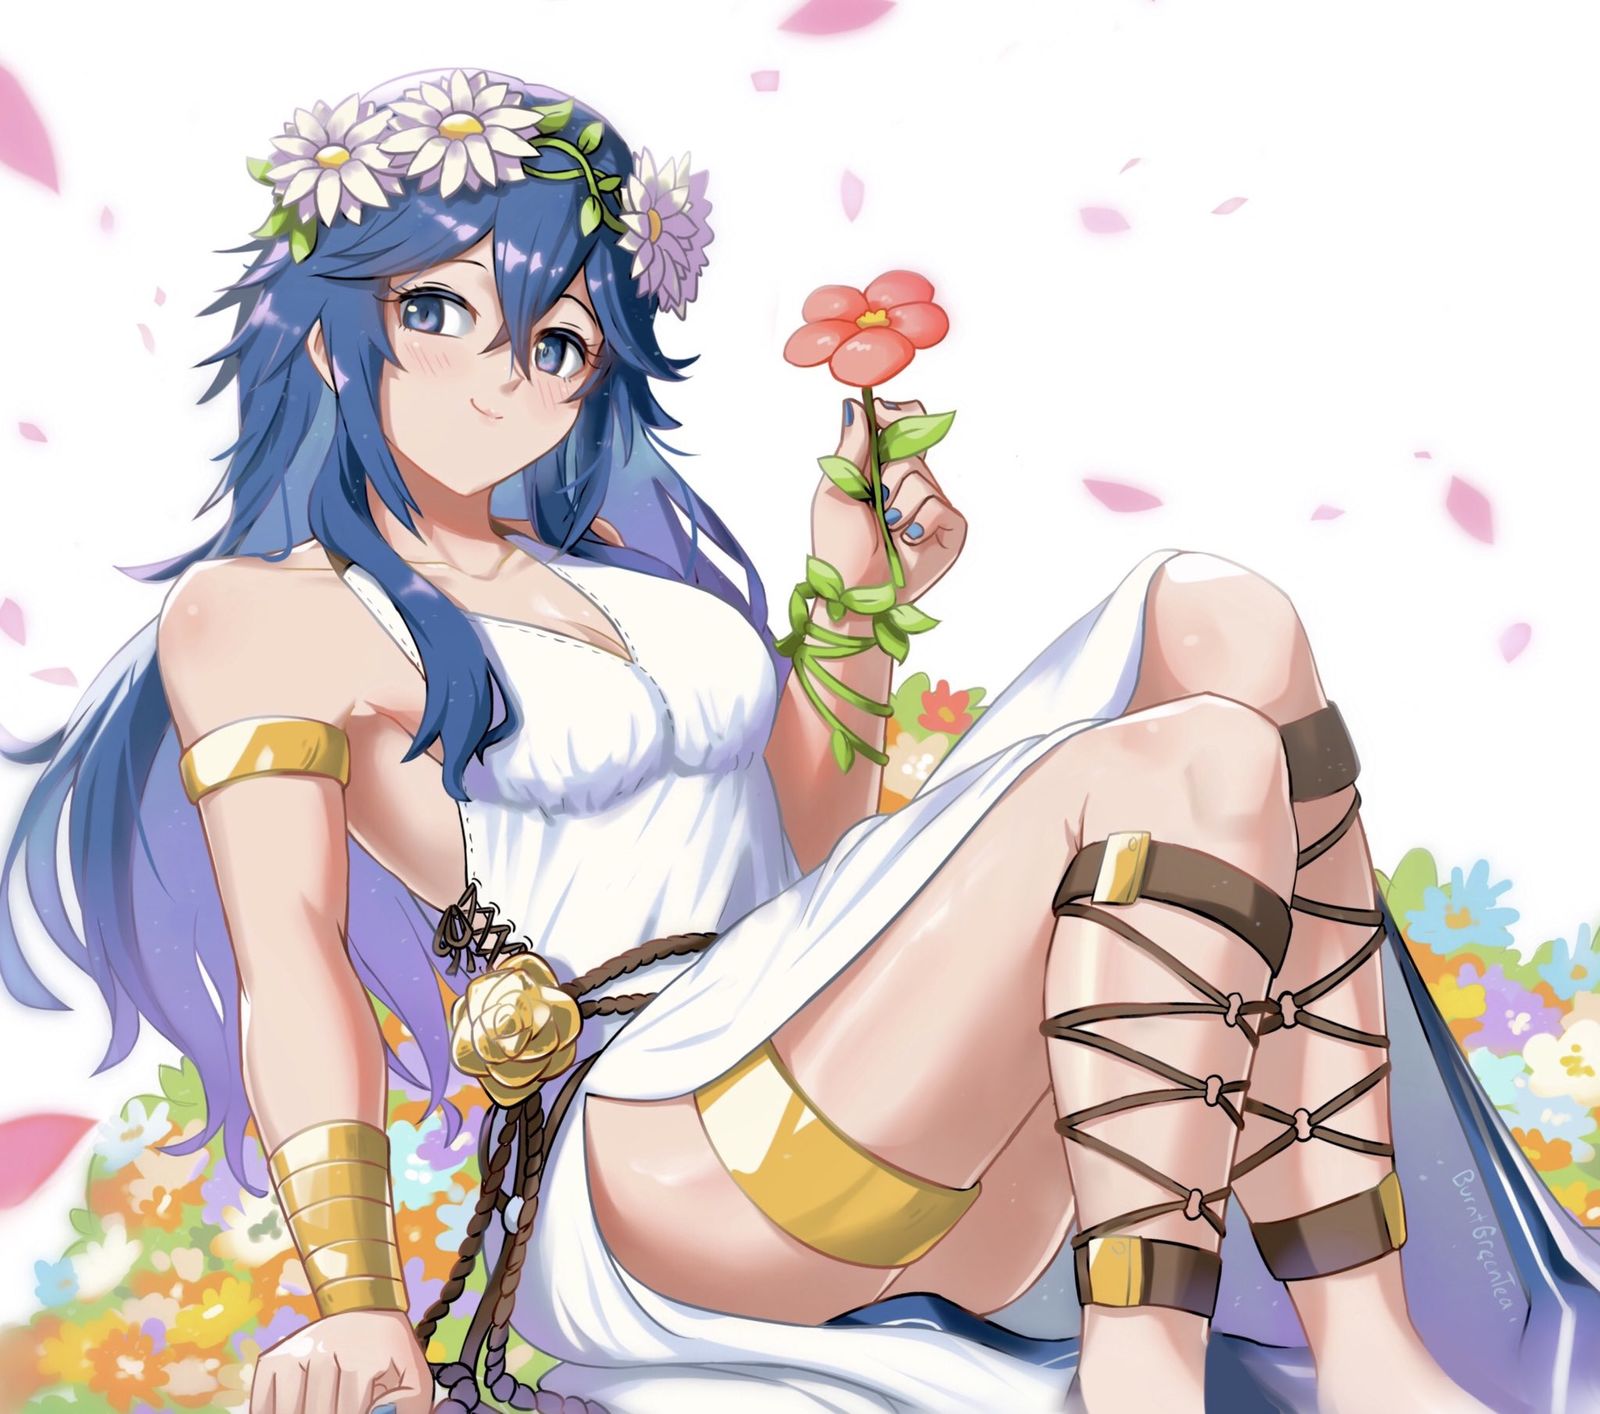 Lucina-Lucina露琪娜